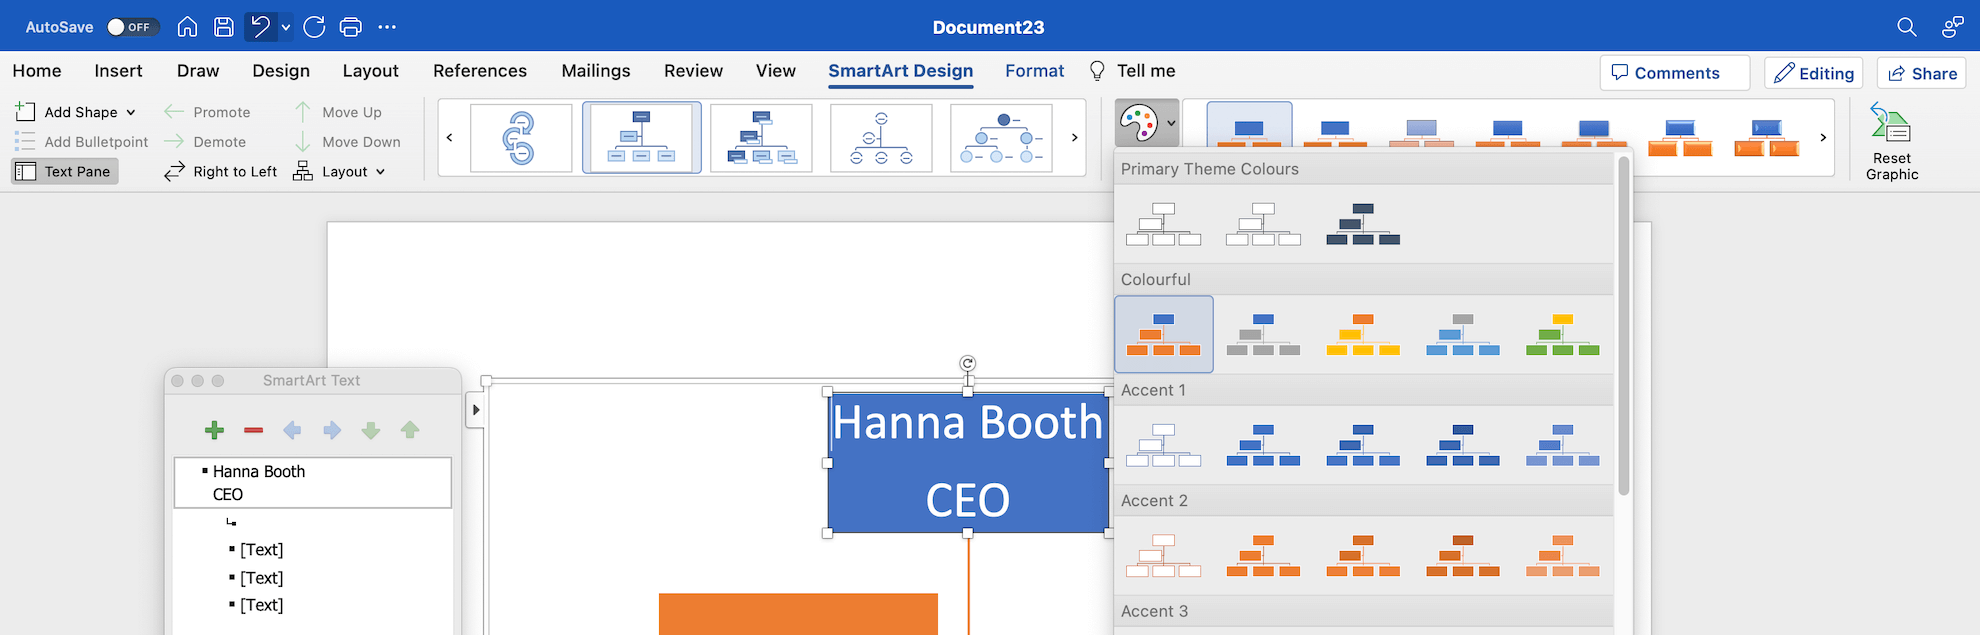 How to Build Your Organizational Chart in Word